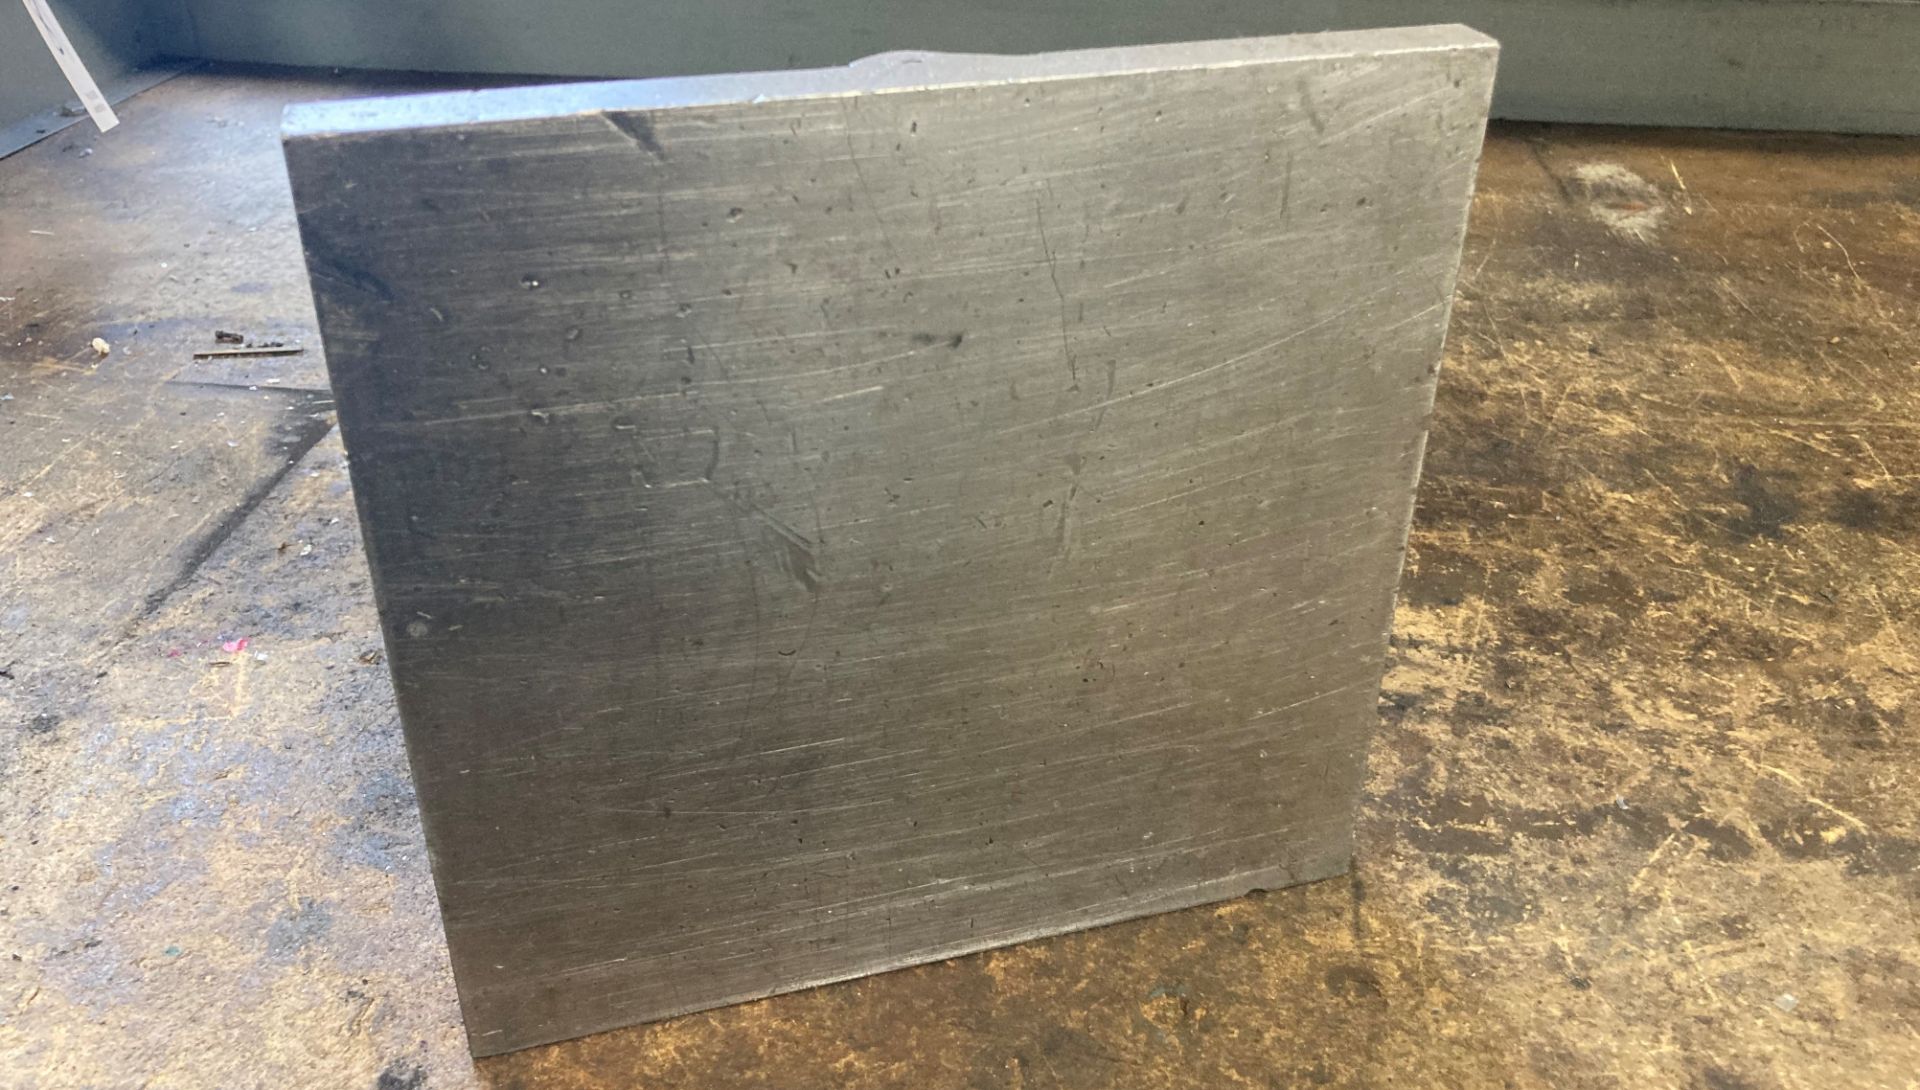 8" x 6" x 8" Right Angle Plate - Image 2 of 4